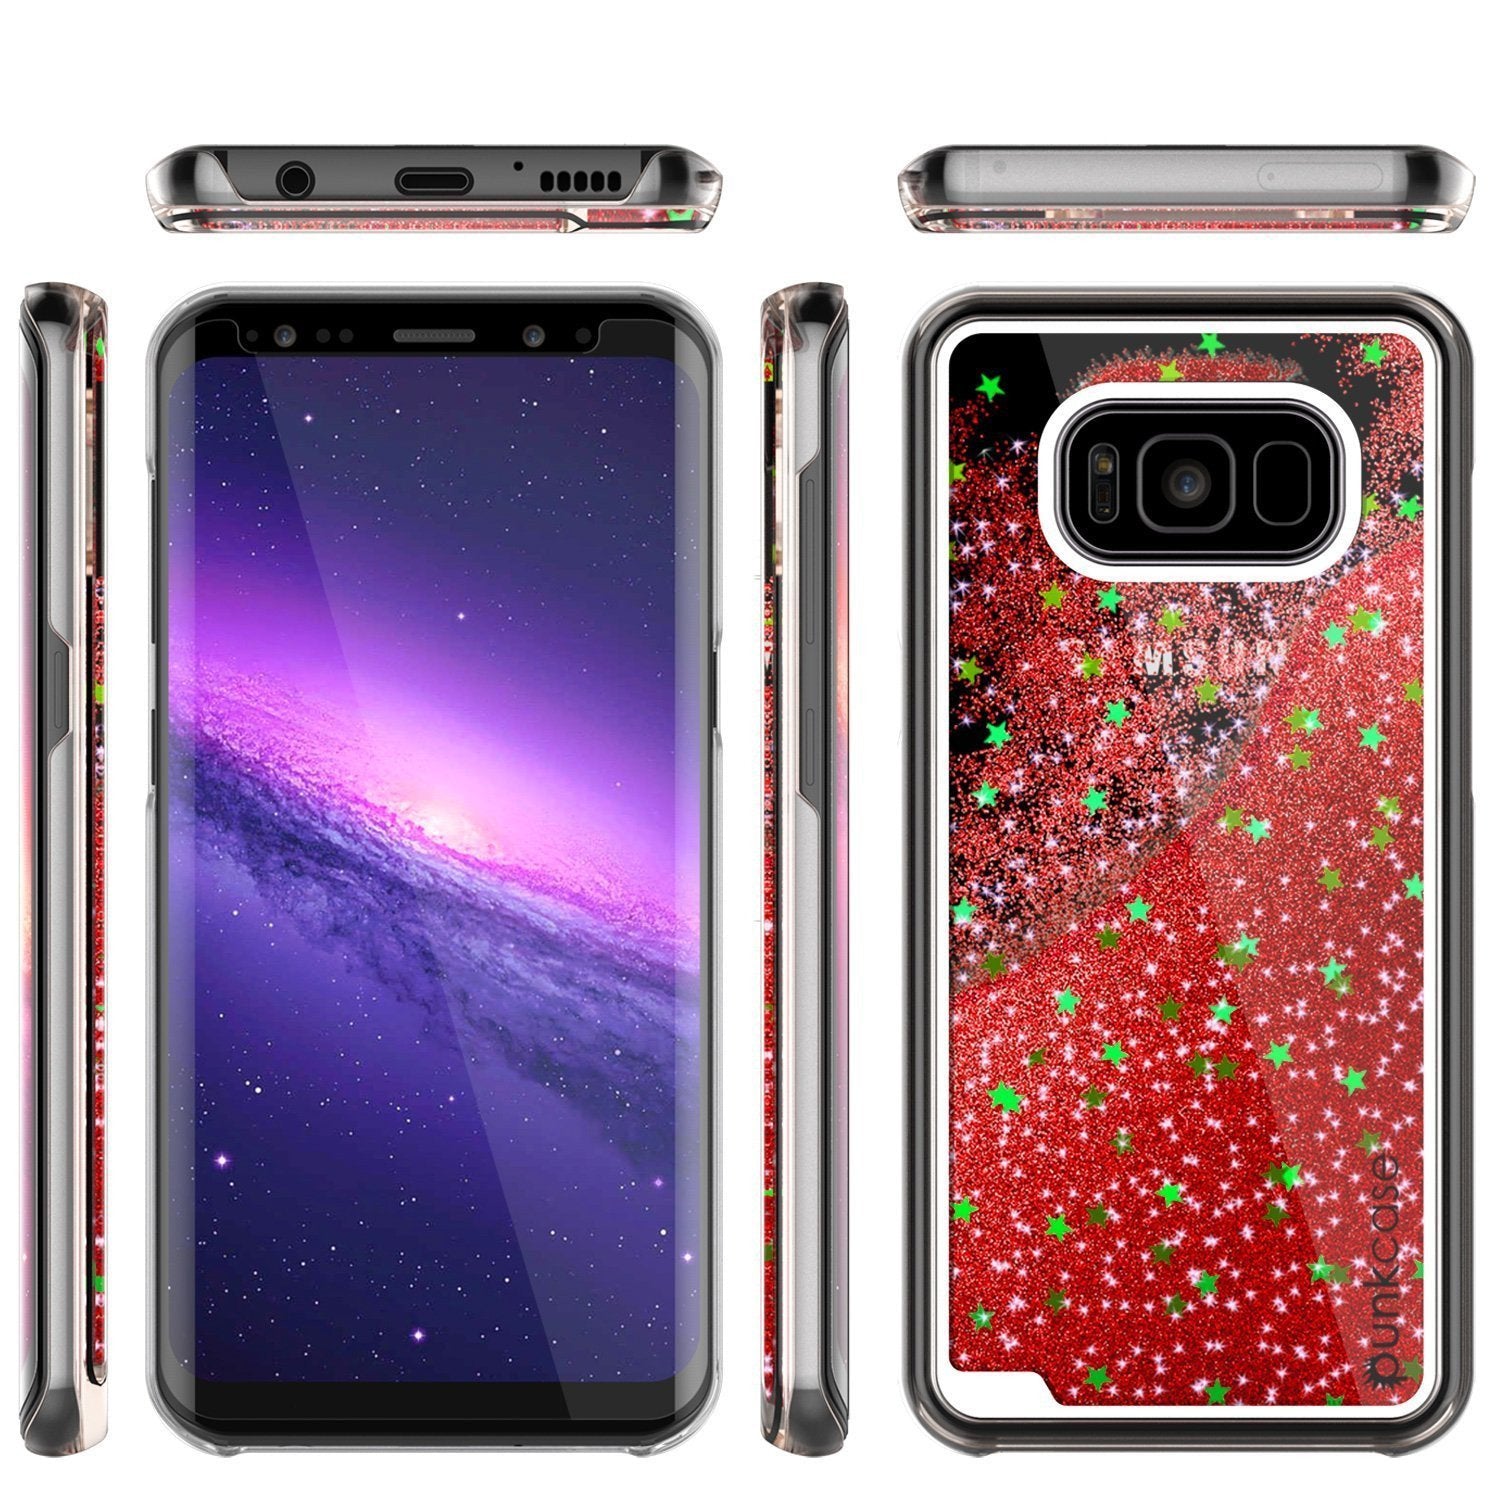 Galaxy S8 Case, Punkcase Liquid Red Series Protective Glitter Cover